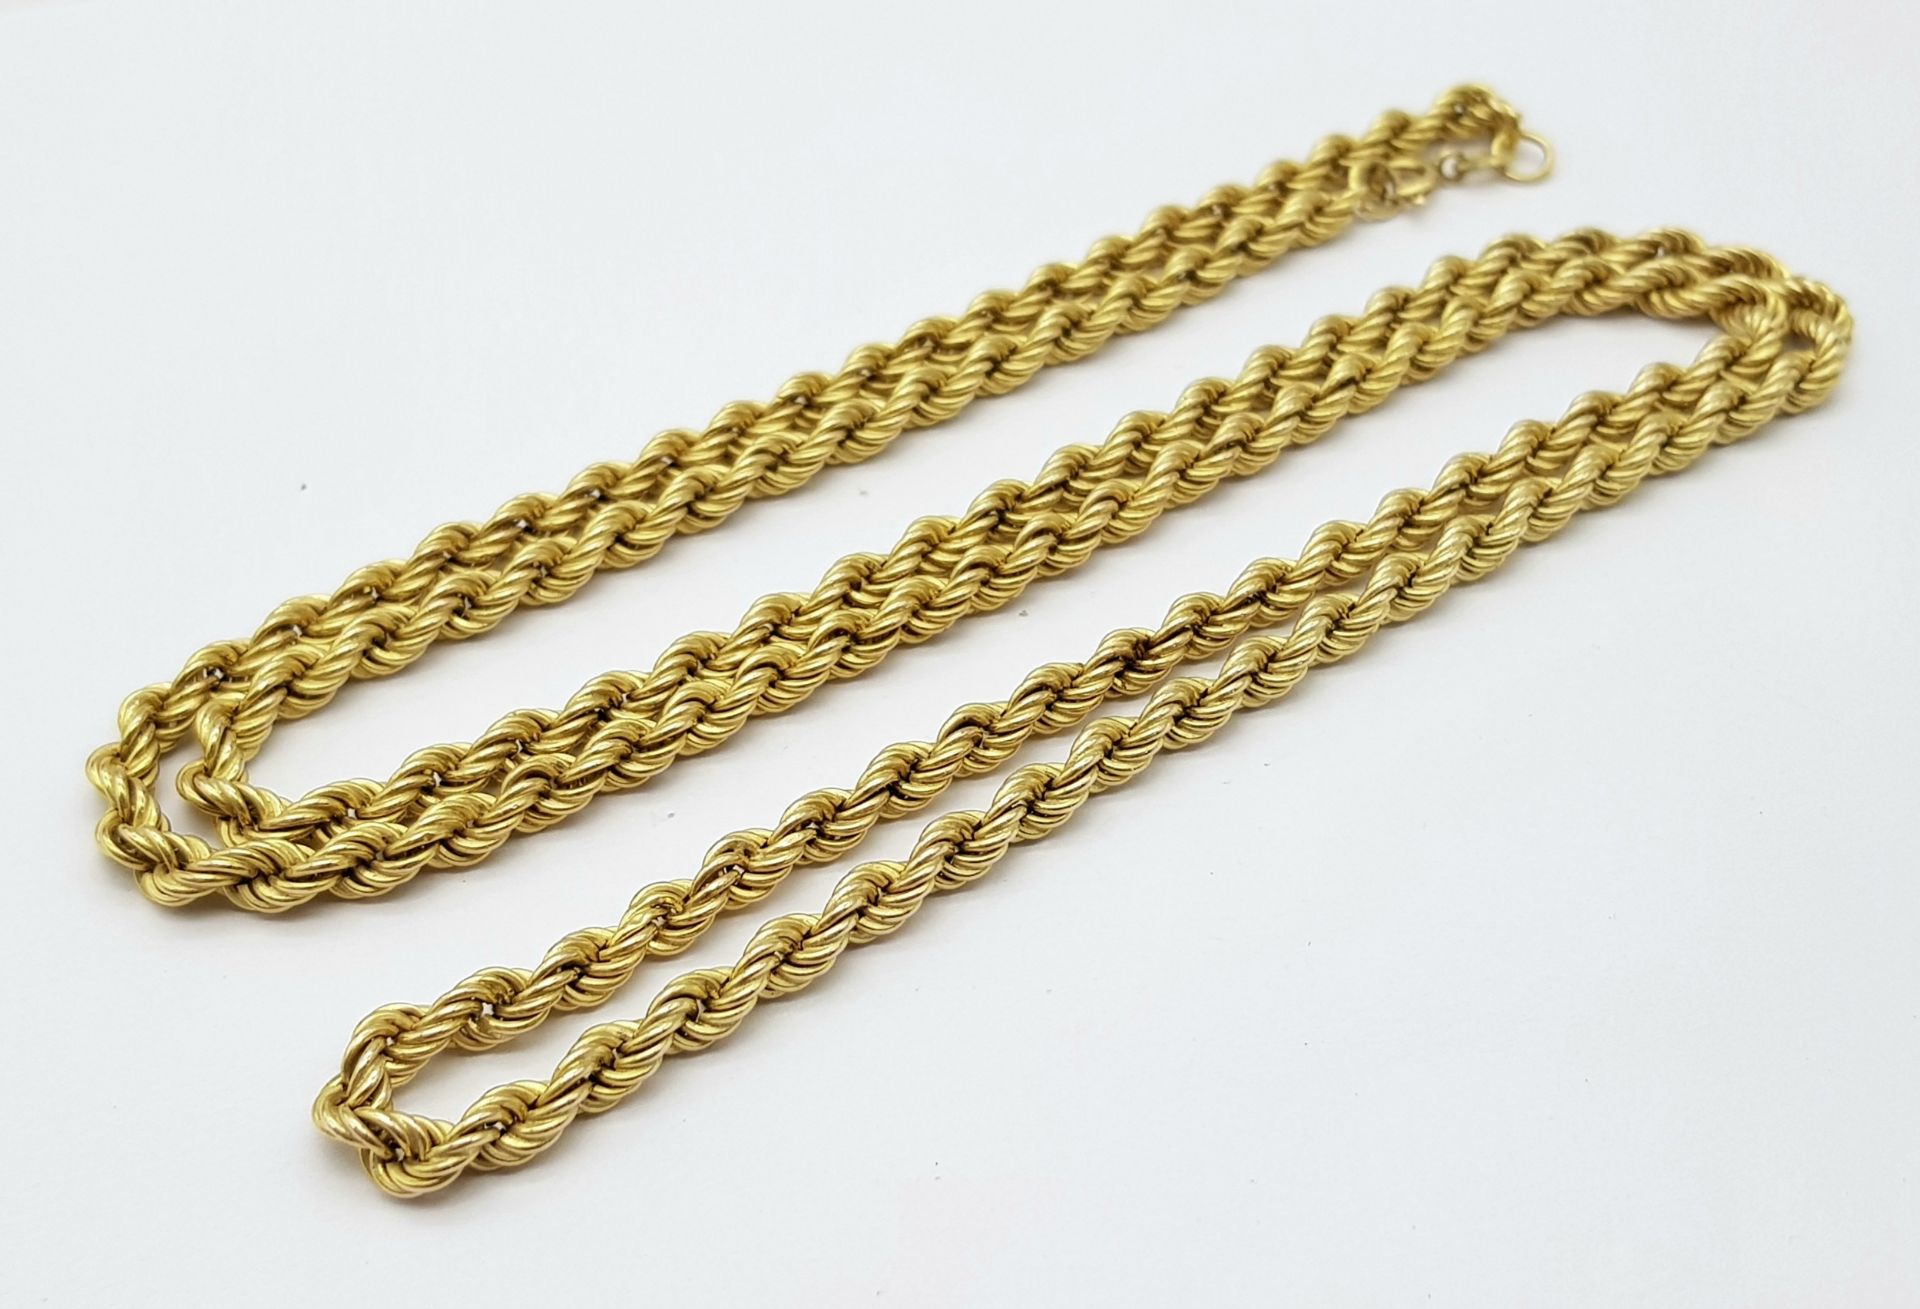 A 9K Yellow Gold Rope Necklace. 74cm. 14.3g weight. - Image 4 of 5